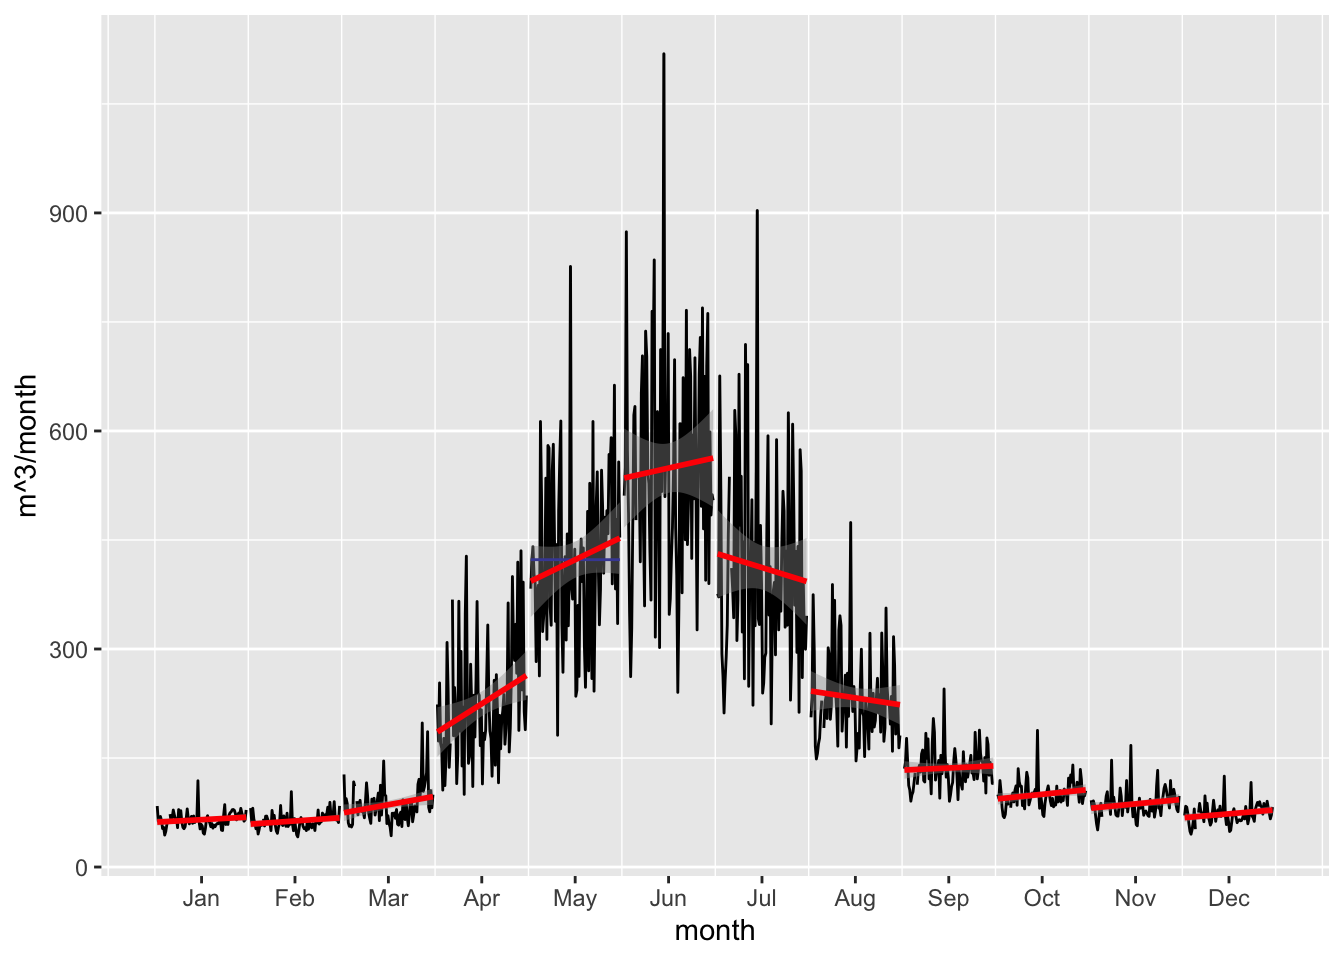 Changes in mean monthly discharges are plotted with black lines over the entire observational record for Charvak Reservoir gauge (16924).The red lines are the per month best fit regression lines.